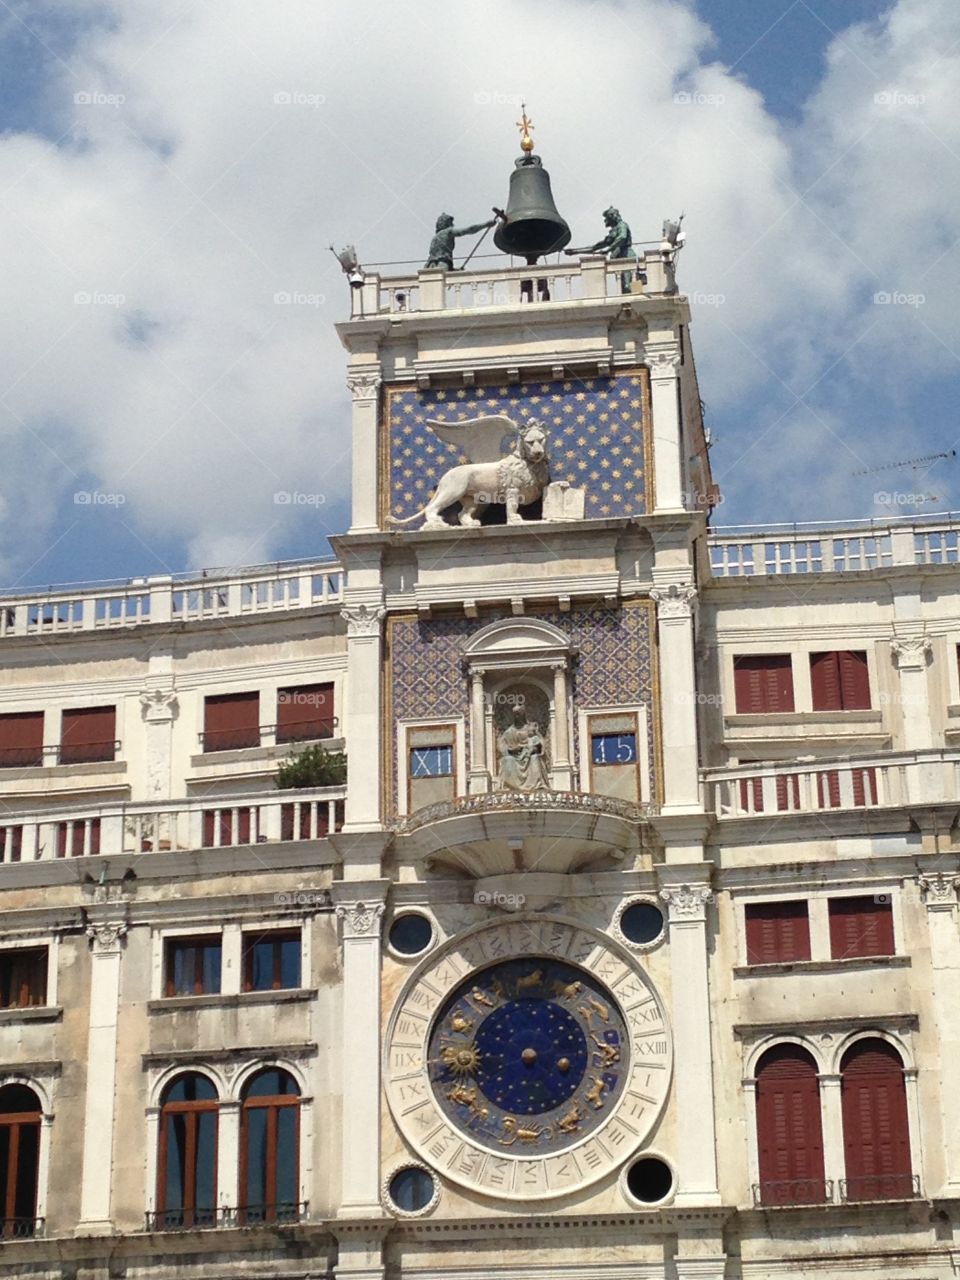 Architecture, Clock, Building, Old, City